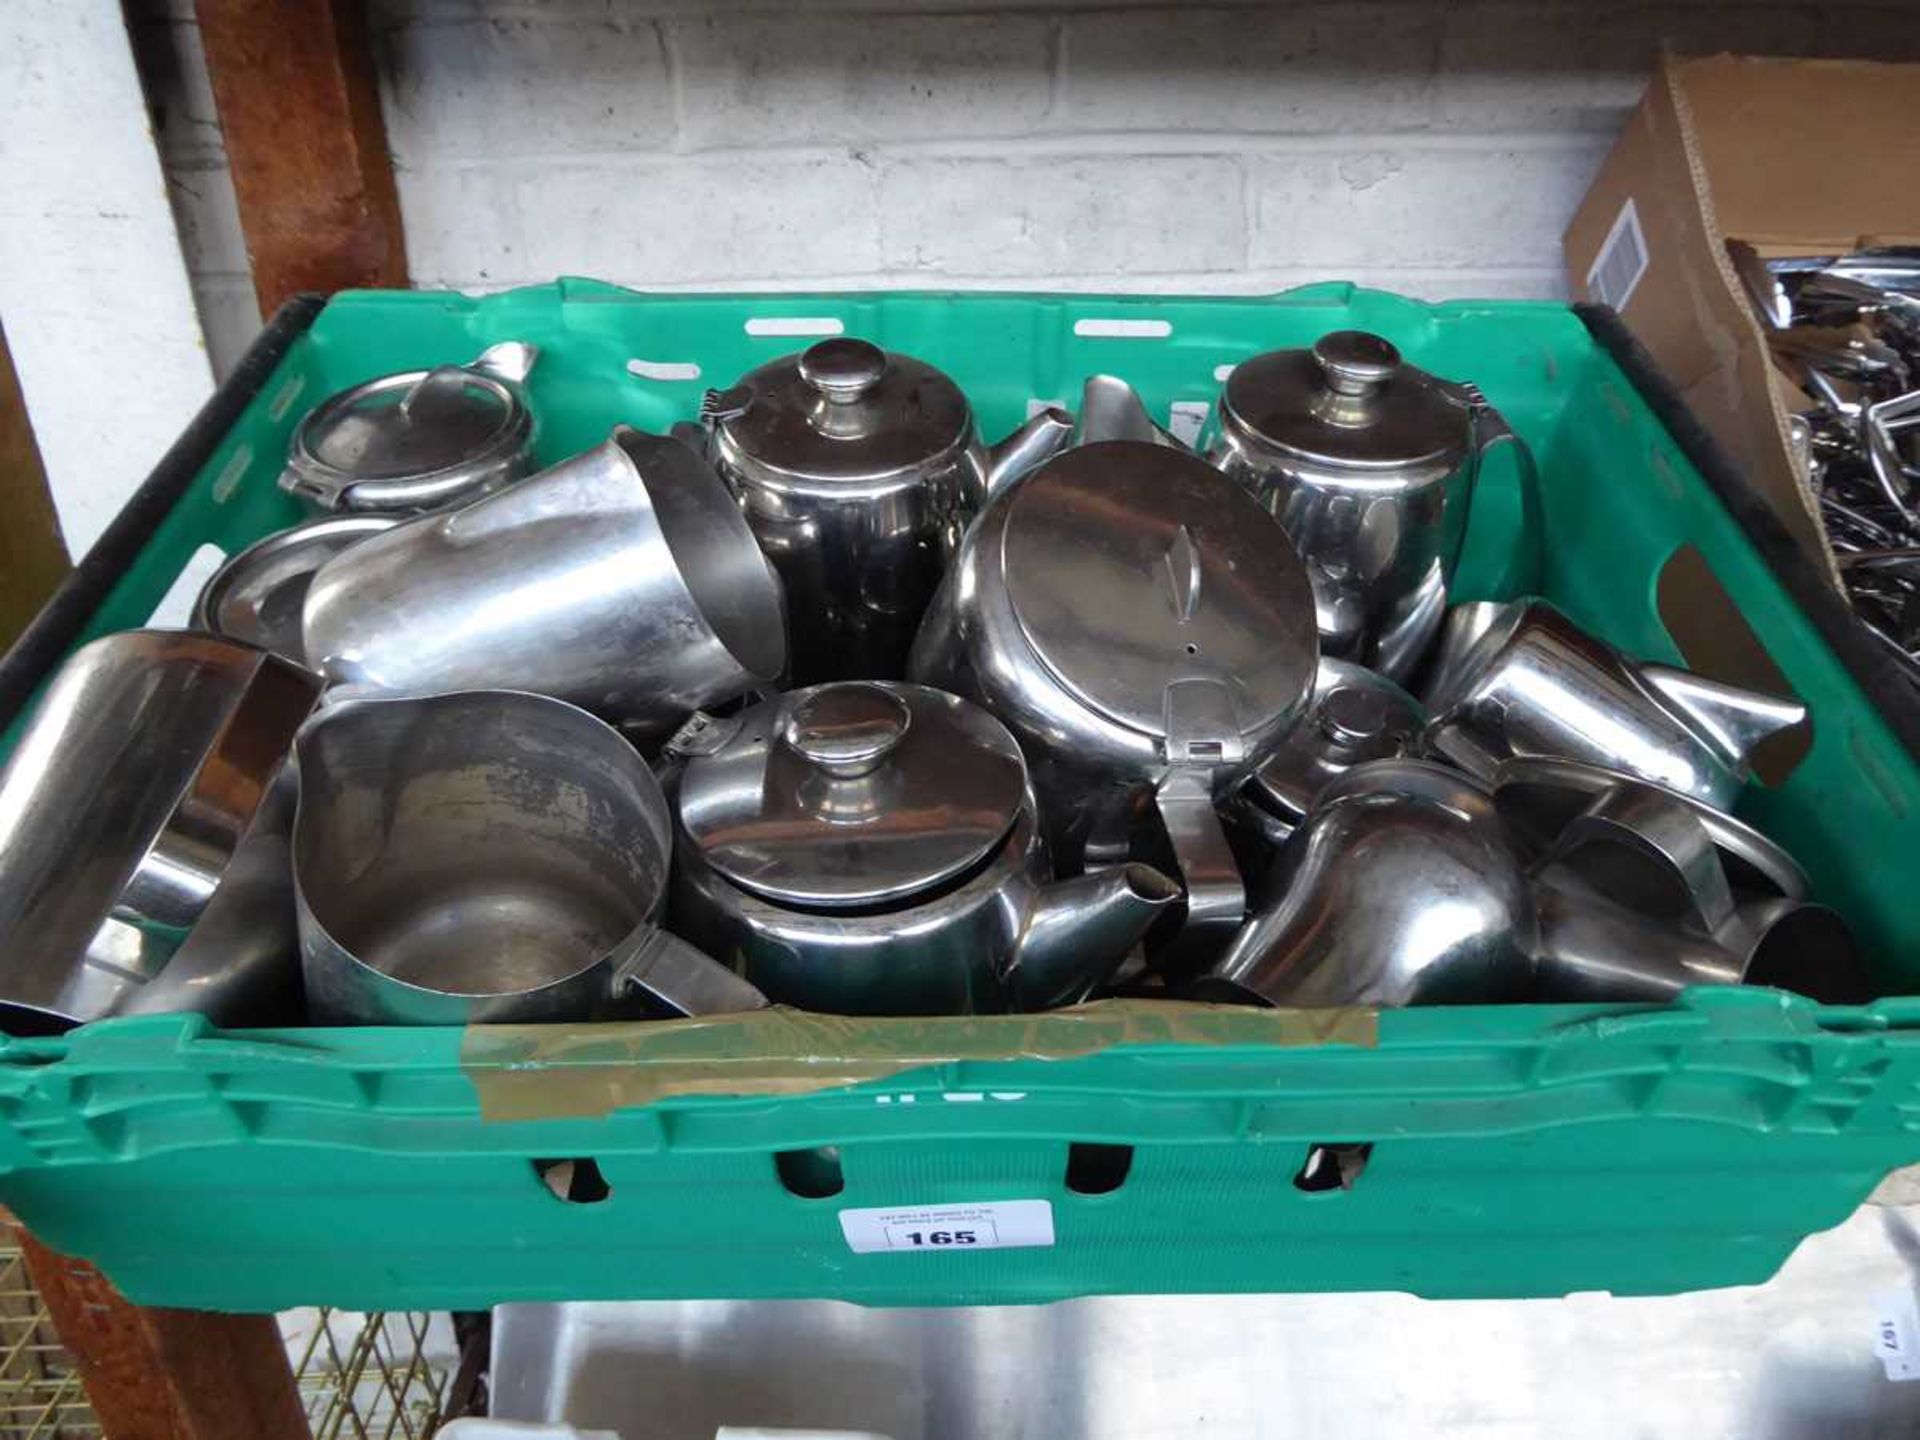 Tray containing assorted stainless steel teapots